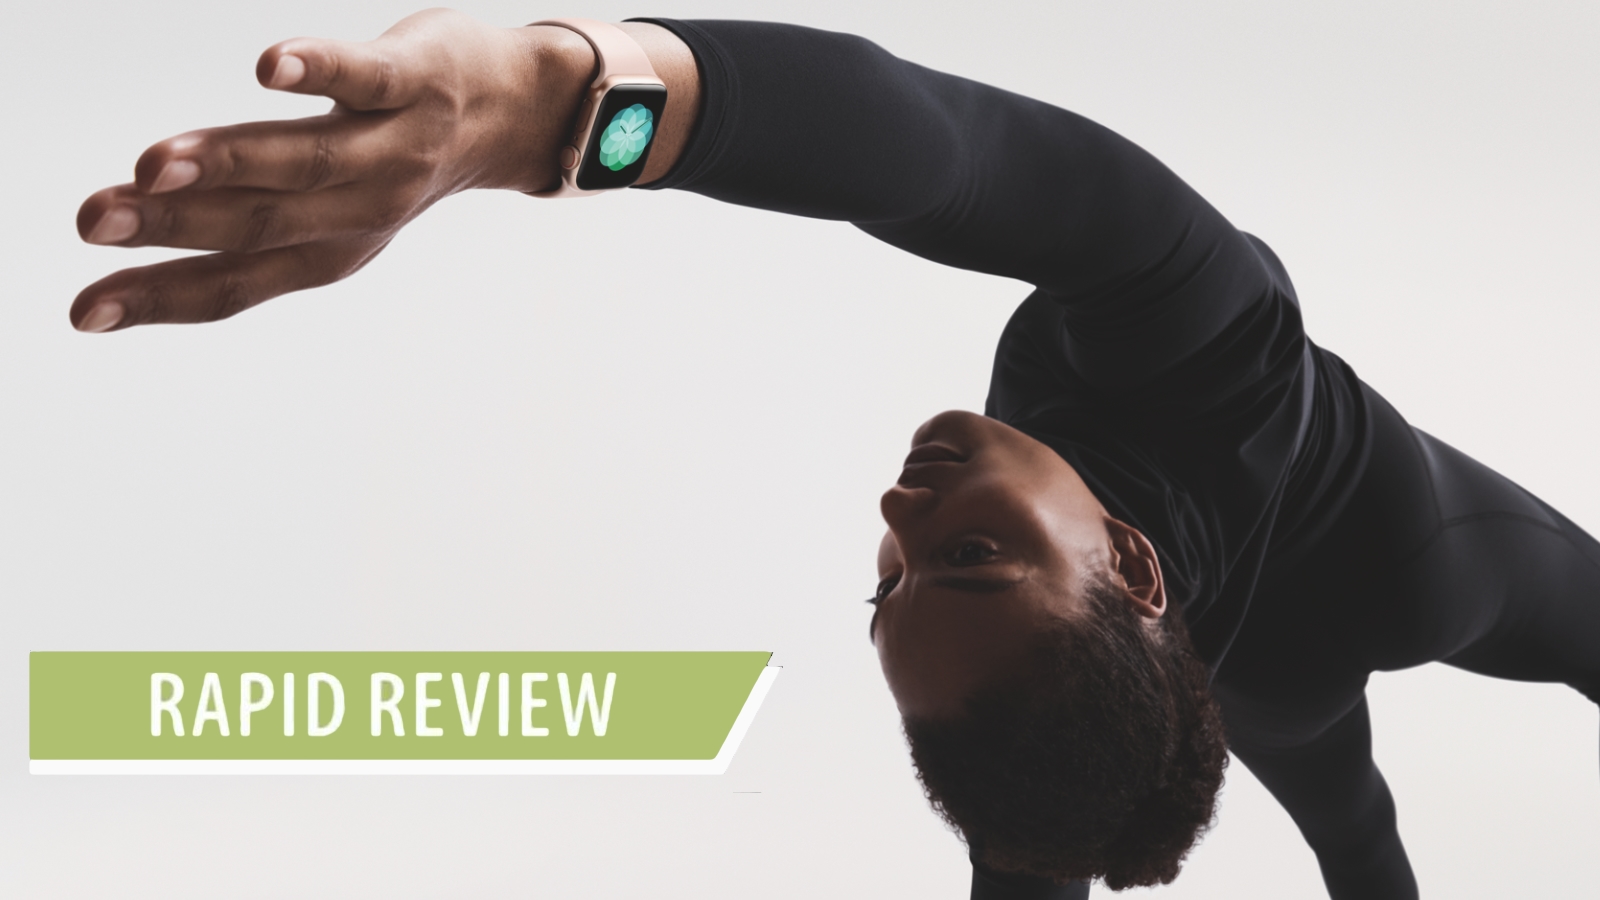 Rapid Review: Apple Watch Series 4